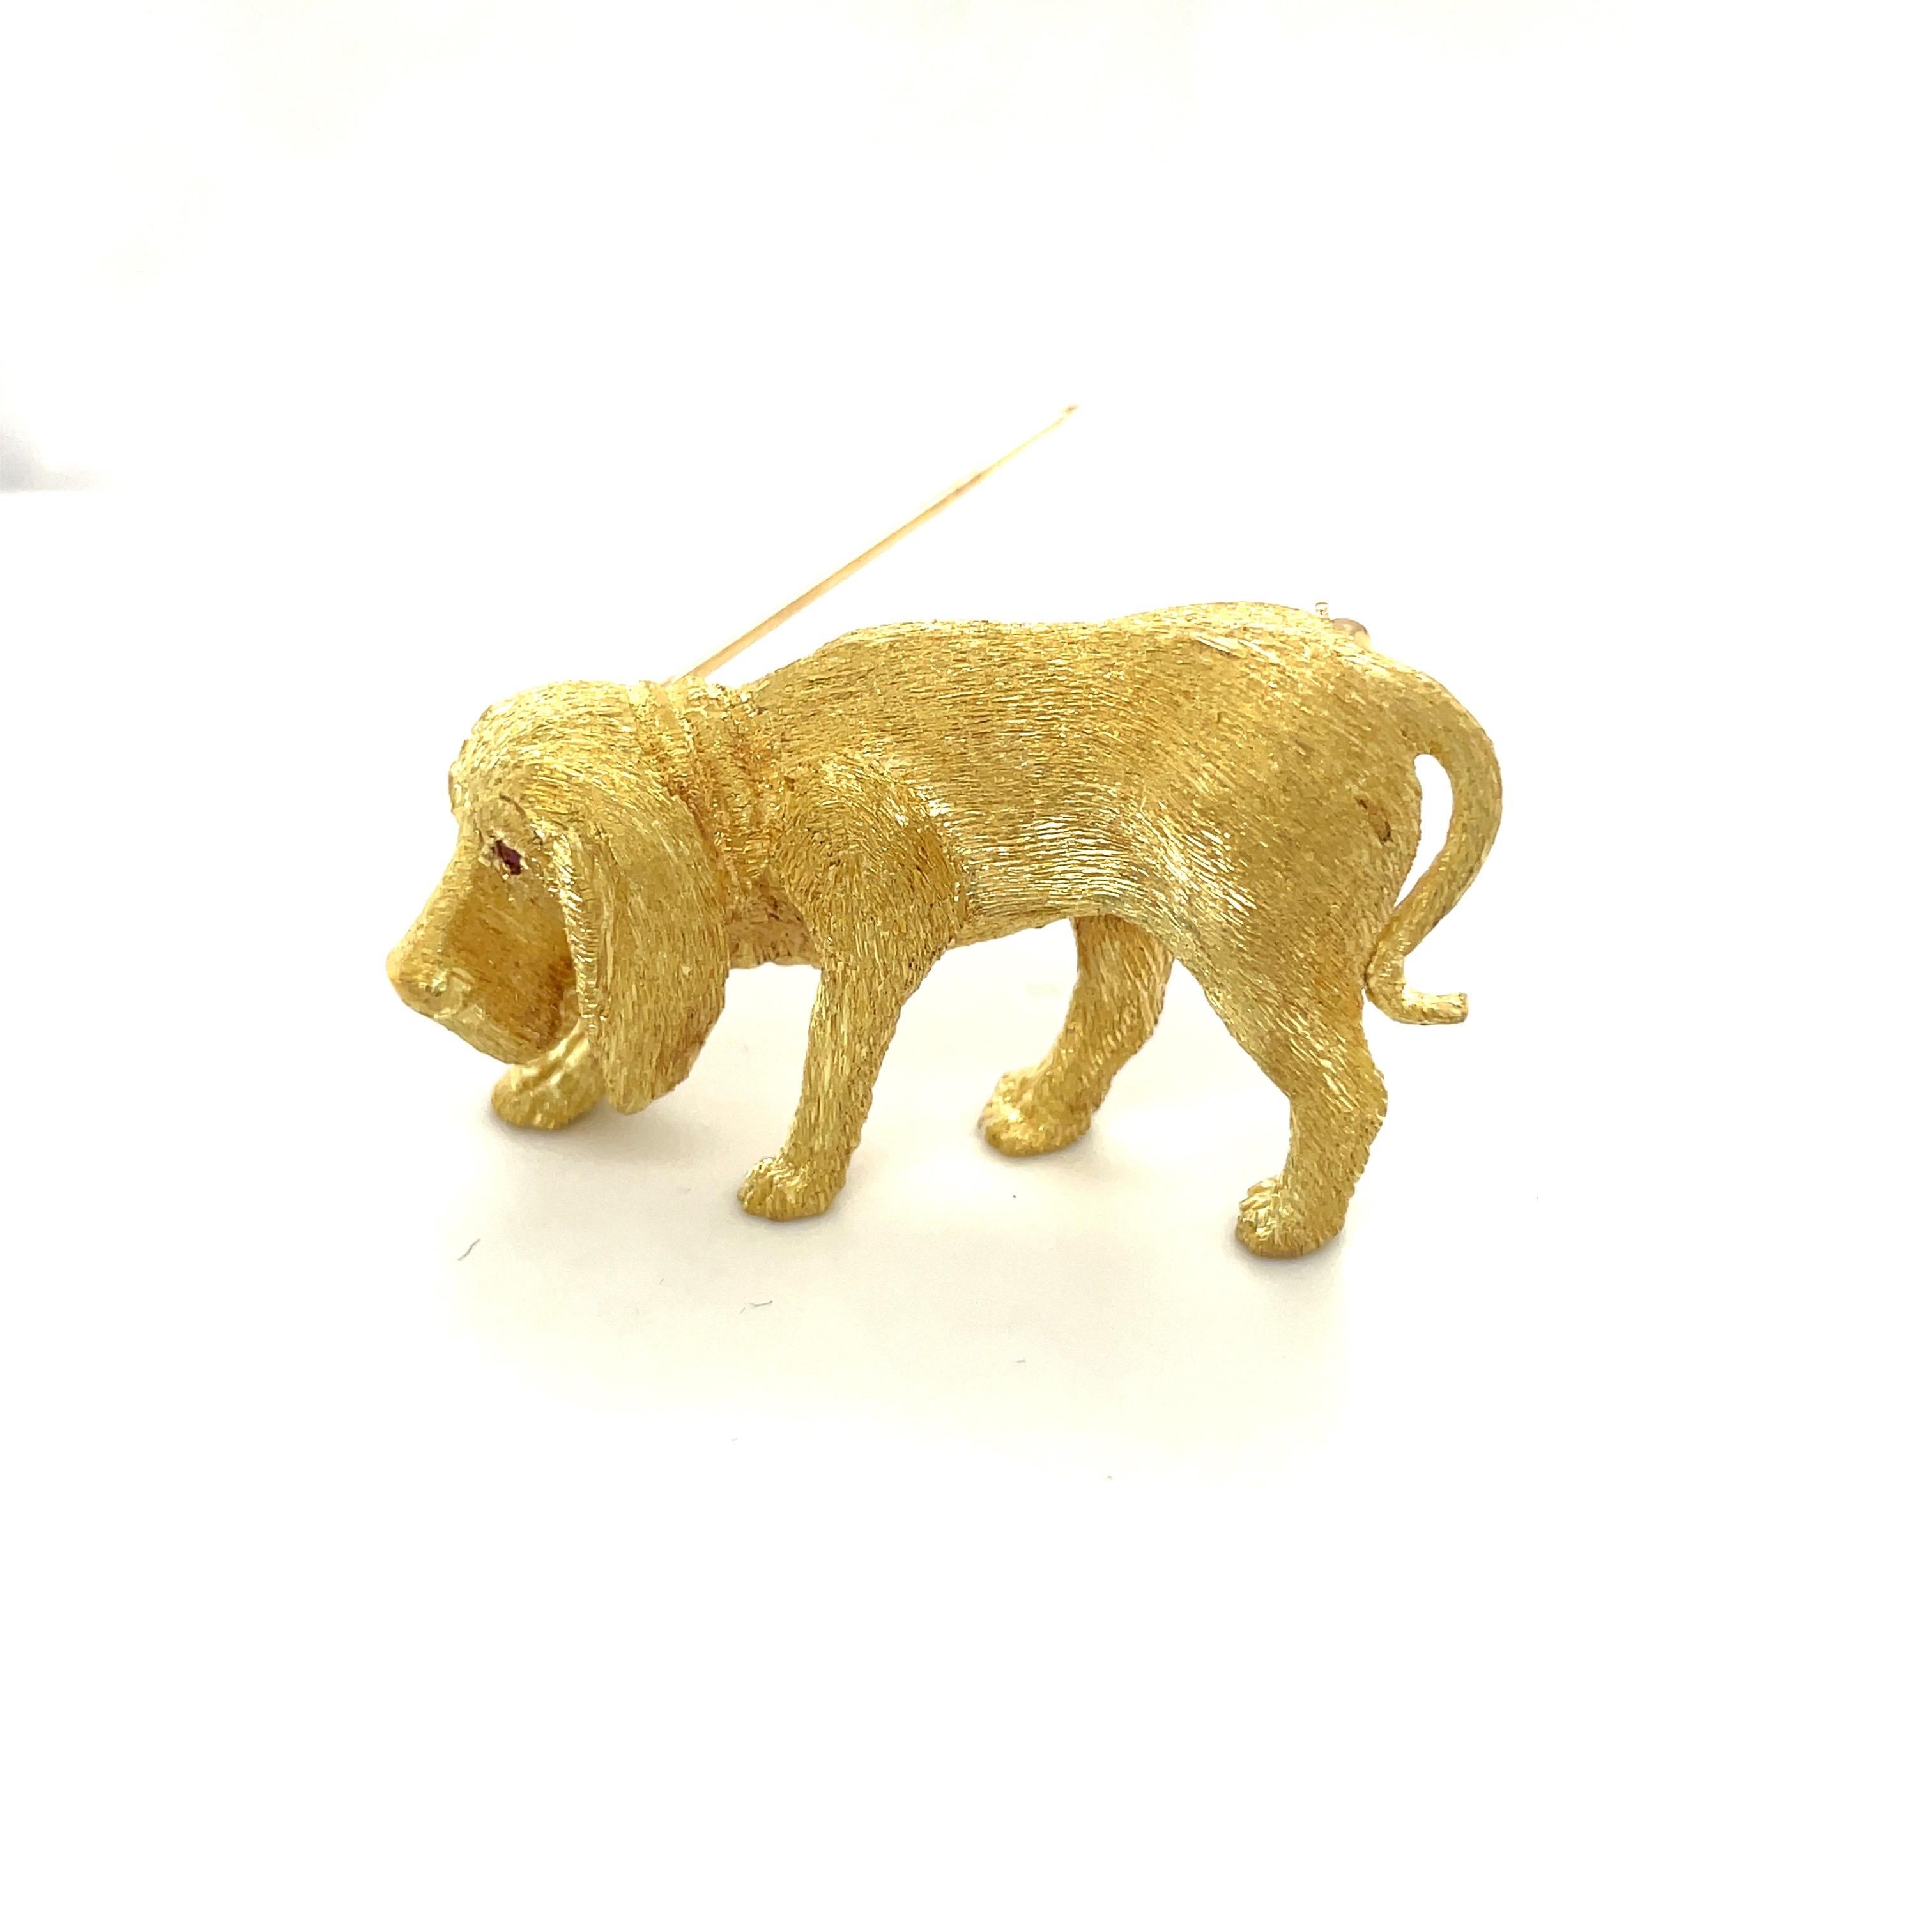 This 18 karat yellow gold Bloodhound brooch is crafted in an etched satin finish. The pup's eyes are set with round brilliant rubies. The brooch measures 1-3/4